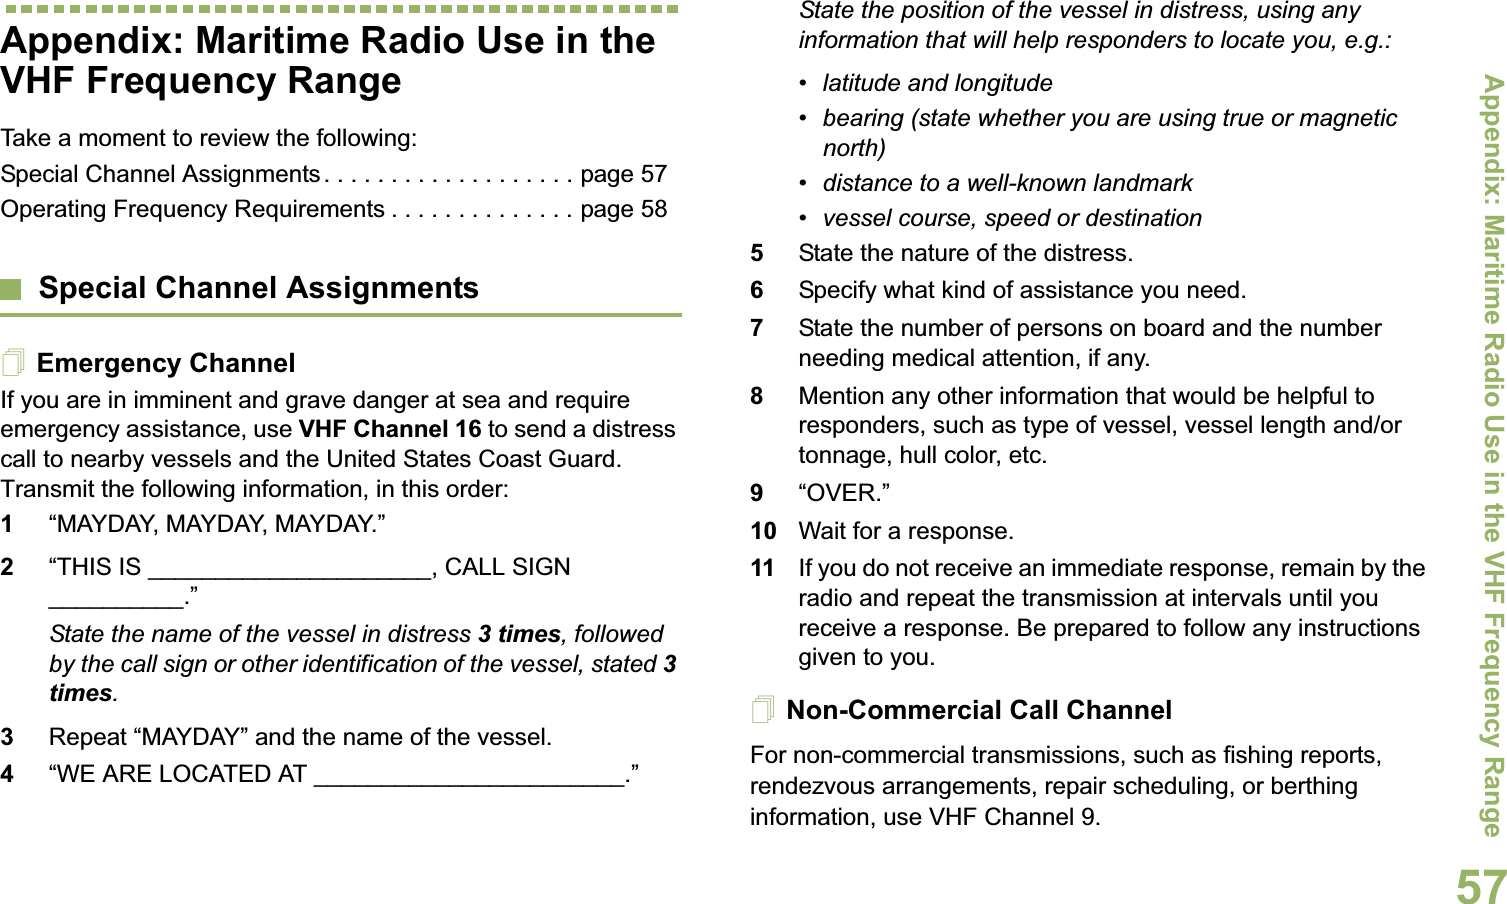 Appendix: Maritime Radio Use in the VHF Frequency RangeEnglish57Appendix: Maritime Radio Use in the VHF Frequency RangeTake a moment to review the following:Special Channel Assignments . . . . . . . . . . . . . . . . . . . page 57Operating Frequency Requirements . . . . . . . . . . . . . . page 58Special Channel AssignmentsEmergency ChannelIf you are in imminent and grave danger at sea and require emergency assistance, use VHF Channel 16 to send a distress call to nearby vessels and the United States Coast Guard. Transmit the following information, in this order:1“MAYDAY, MAYDAY, MAYDAY.” 2“THIS IS _____________________, CALL SIGN __________.”State the name of the vessel in distress 3 times, followed by the call sign or other identification of the vessel, stated 3 times.3Repeat “MAYDAY” and the name of the vessel. 4“WE ARE LOCATED AT _______________________.”State the position of the vessel in distress, using any information that will help responders to locate you, e.g.: • latitude and longitude • bearing (state whether you are using true or magnetic north) • distance to a well-known landmark• vessel course, speed or destination5State the nature of the distress. 6Specify what kind of assistance you need. 7State the number of persons on board and the number needing medical attention, if any.8Mention any other information that would be helpful to responders, such as type of vessel, vessel length and/or tonnage, hull color, etc.9“OVER.”10 Wait for a response. 11 If you do not receive an immediate response, remain by the radio and repeat the transmission at intervals until you receive a response. Be prepared to follow any instructions given to you.Non-Commercial Call ChannelFor non-commercial transmissions, such as fishing reports, rendezvous arrangements, repair scheduling, or berthing information, use VHF Channel 9.